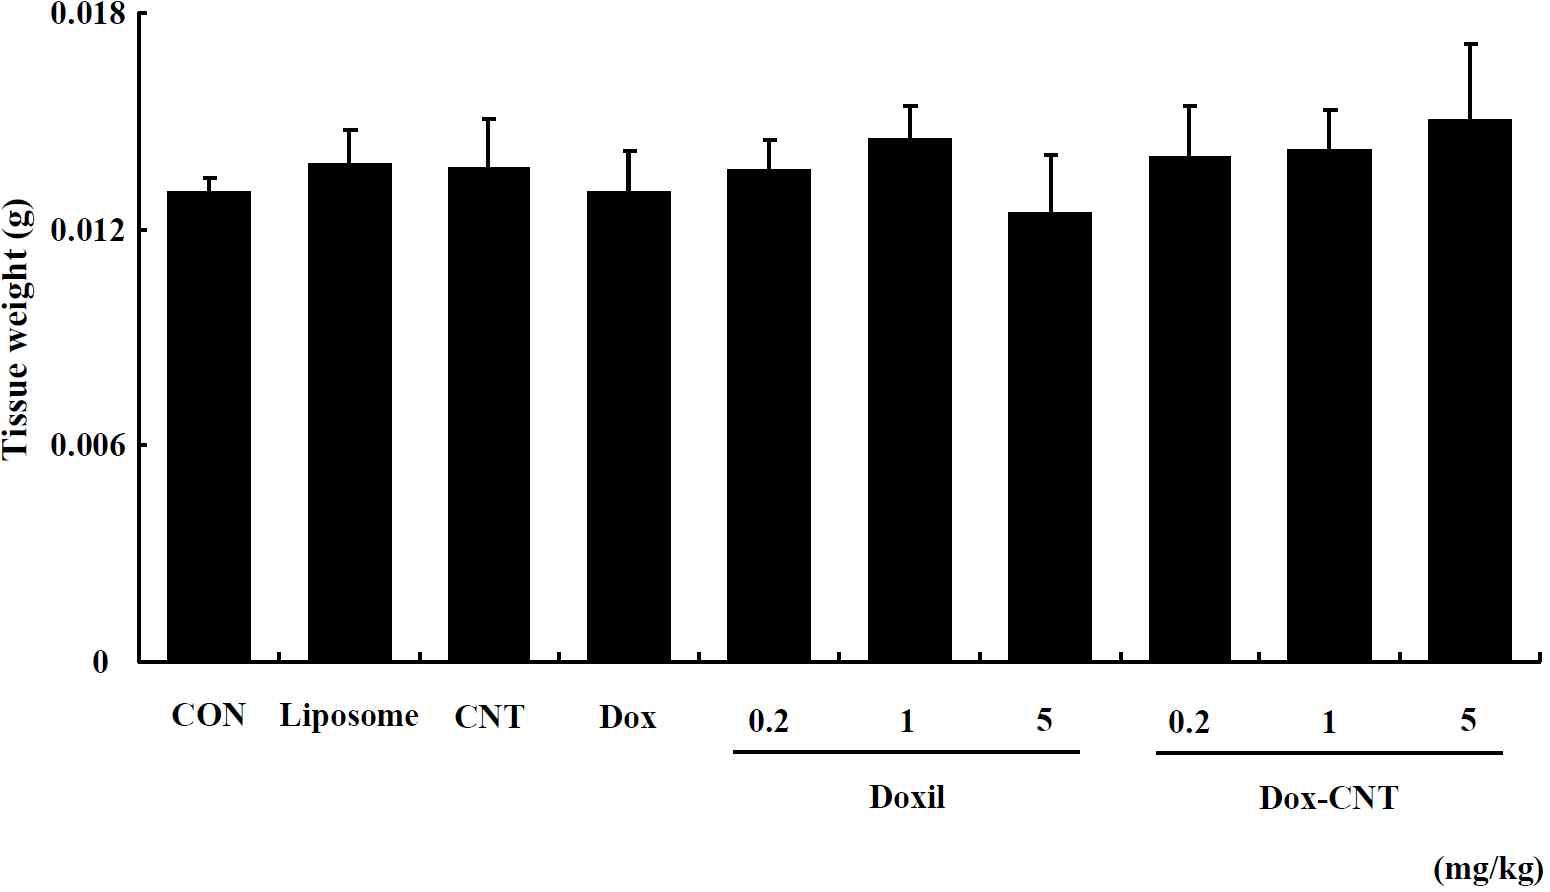 The change of lymph node weight in male ICR mice of repeated exposure for 14 days. Mice were respectively administered by intravenous injection with liposome, CNT, Dox, Doxil (0.2, 1, 5 mg/kg) and Dox-CNT (0.2, 1, 5 mg/kg). The results are presented as mean ± SE (n = 10). * p < 0.05, significantly different from the control.